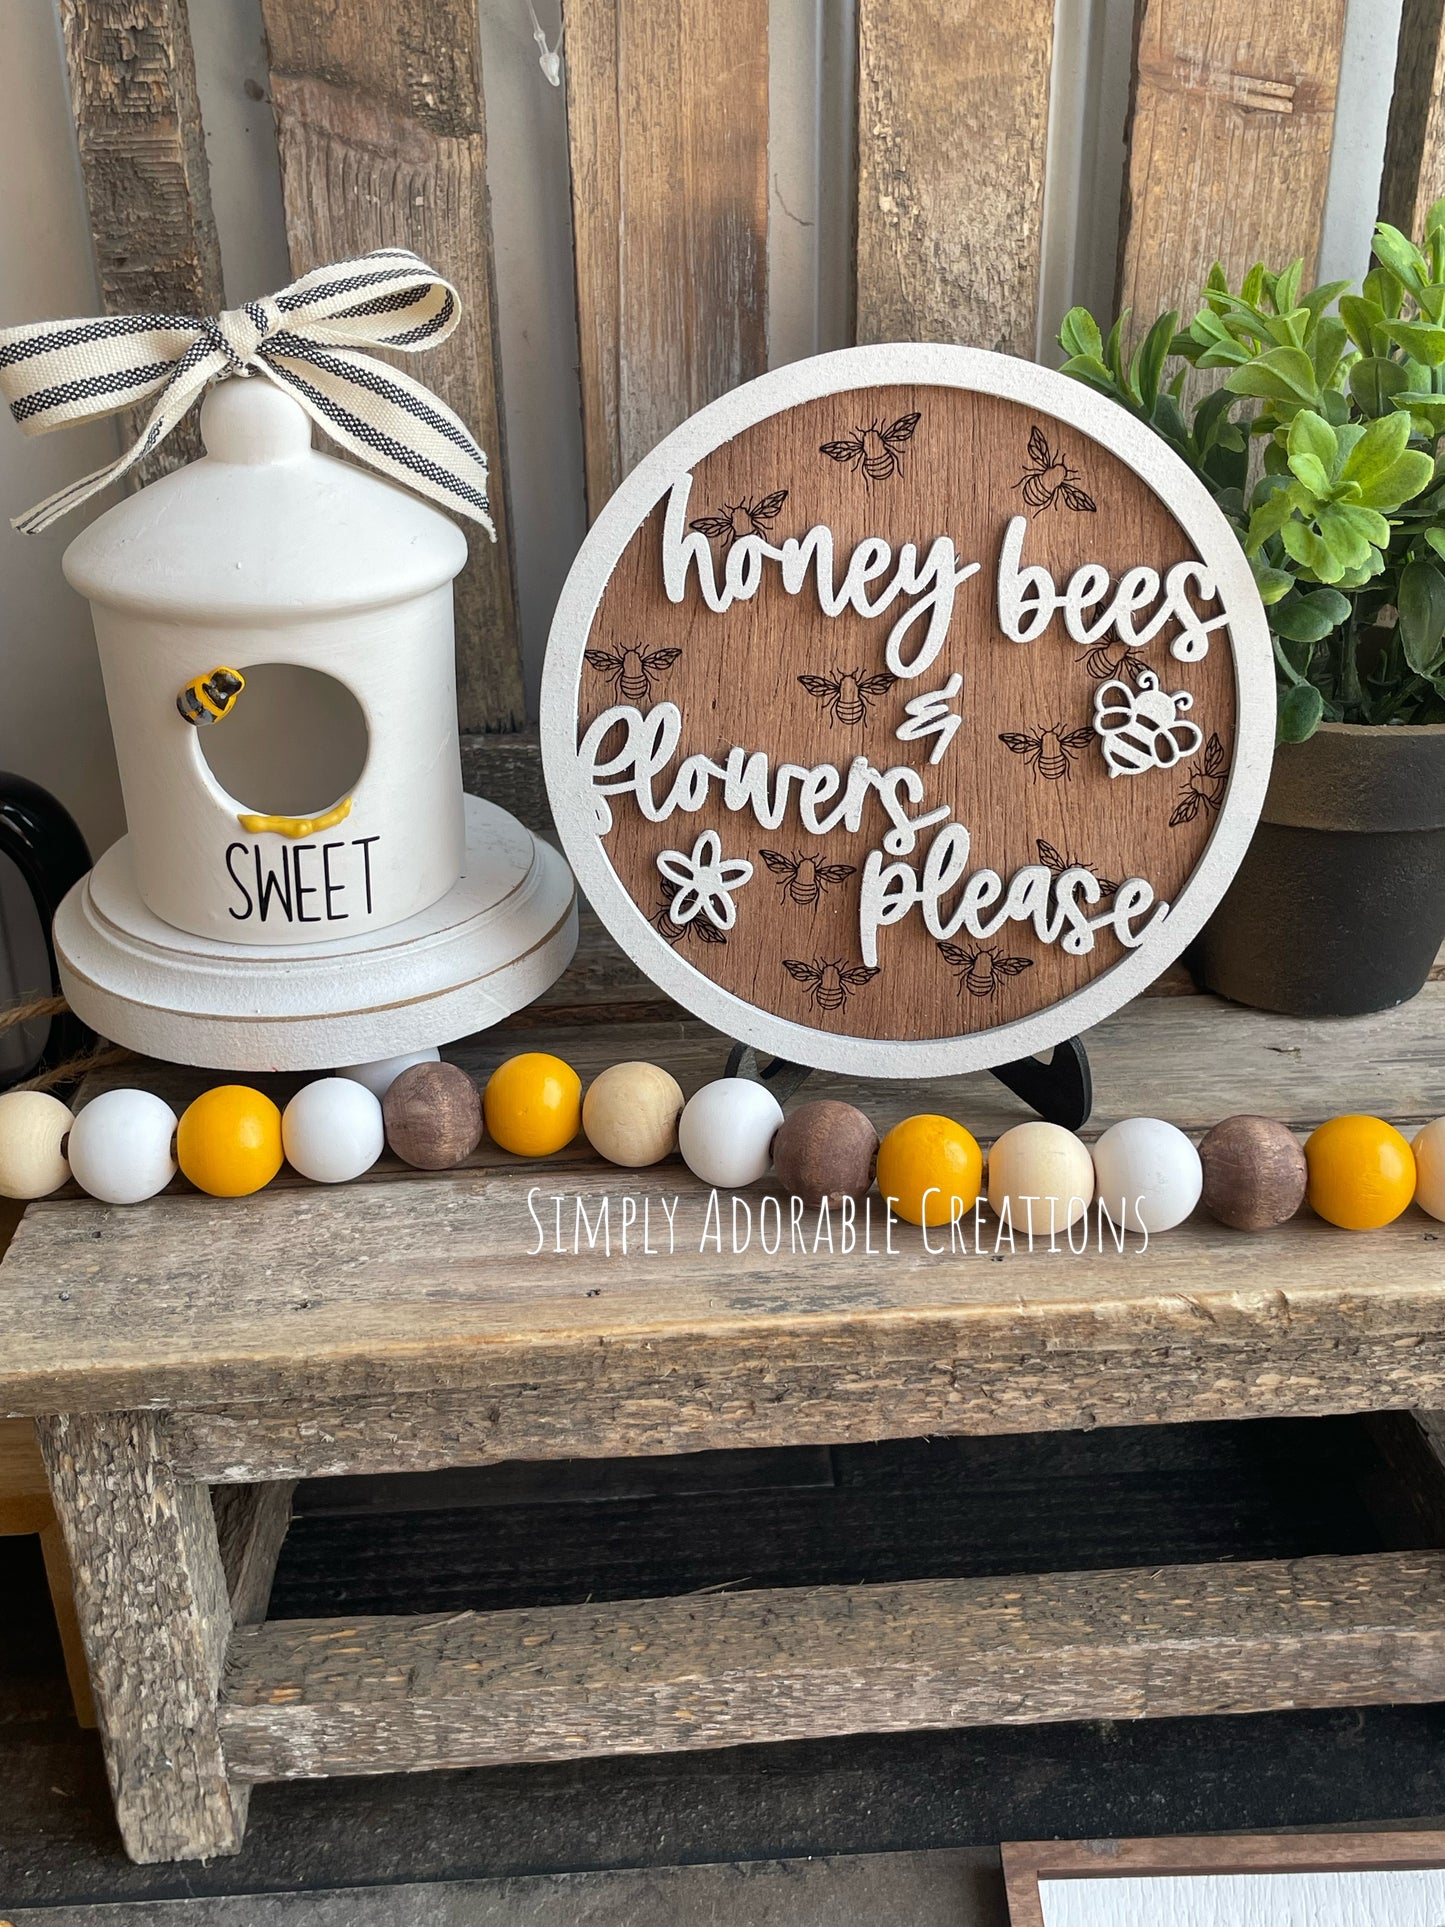 Honey Bees and Flowers Please Tiered Tray Bundle